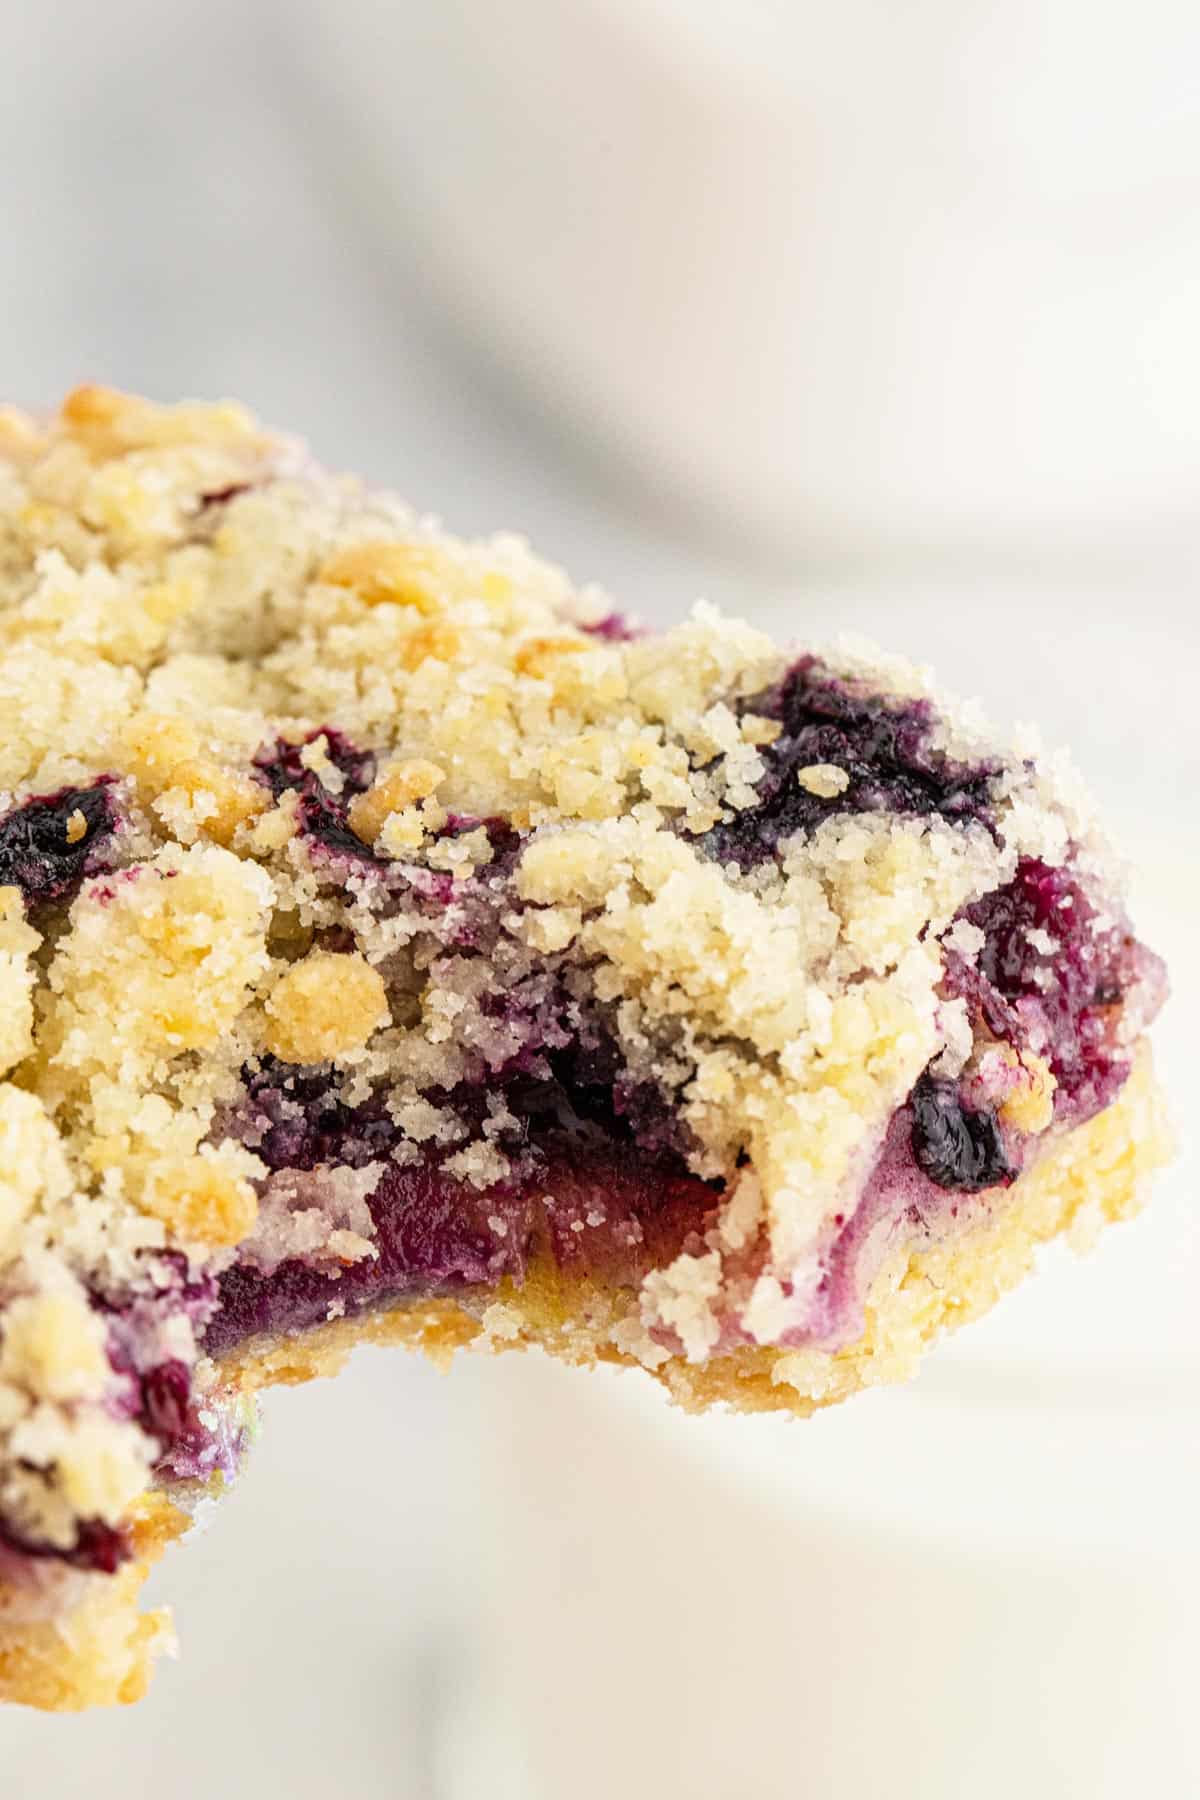 A close up of one crumble blueberry bar with a bite missing.